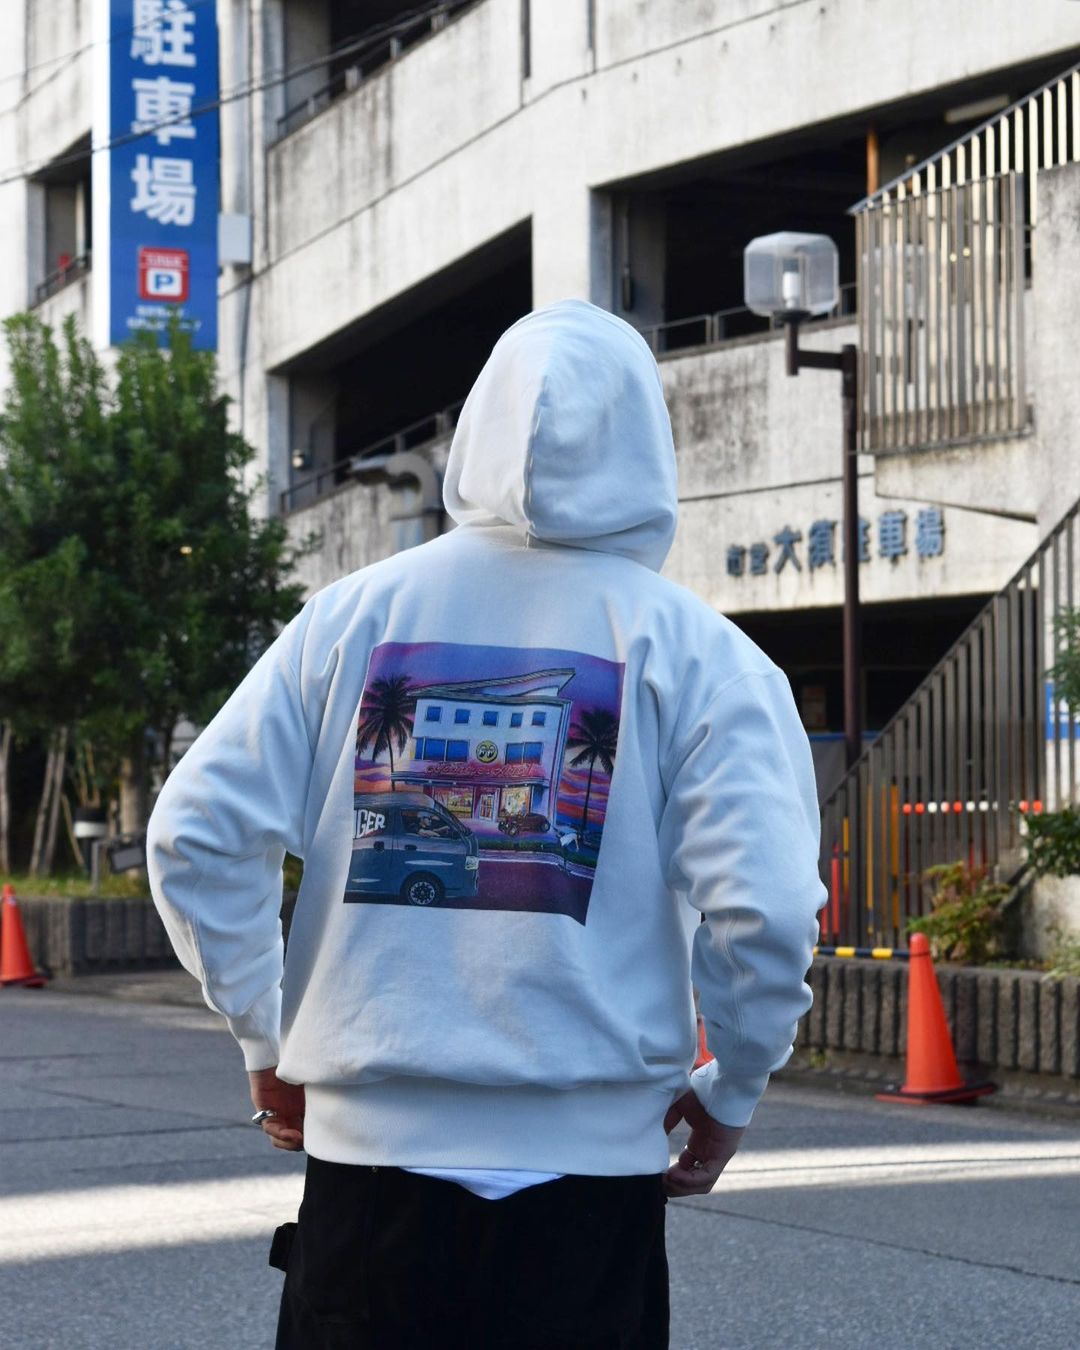 CHALLENGER / CHALLENGER × MOON EQUIPPED HOODIE